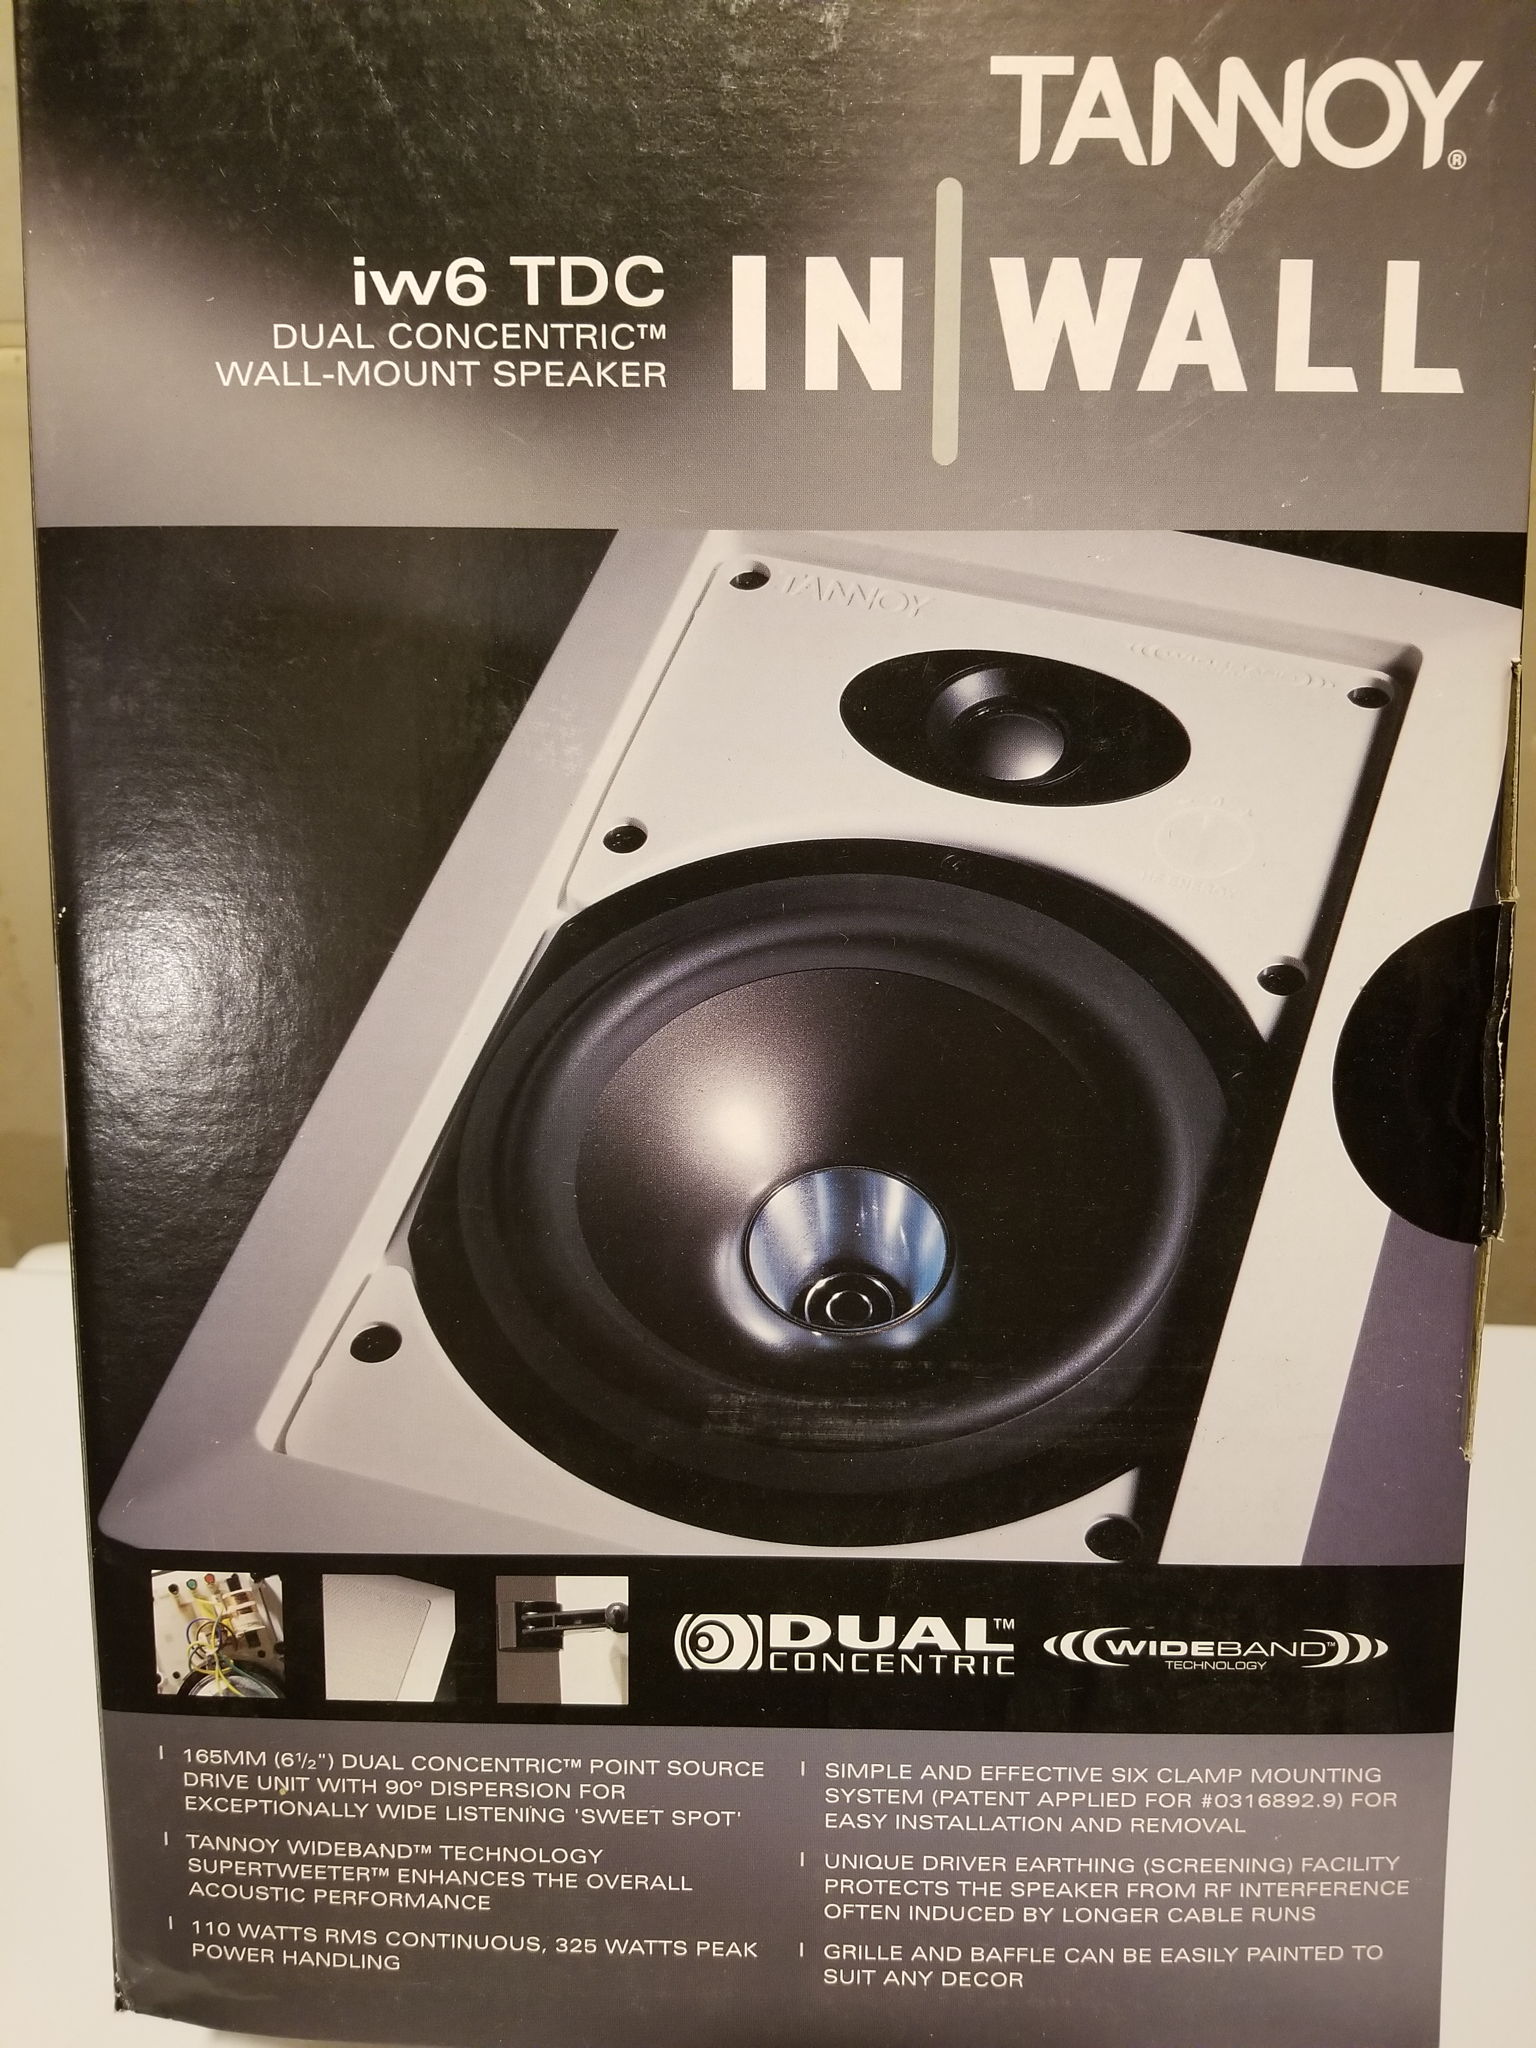 Tannoy iw6 TDC and CMS 401DCe Speakers